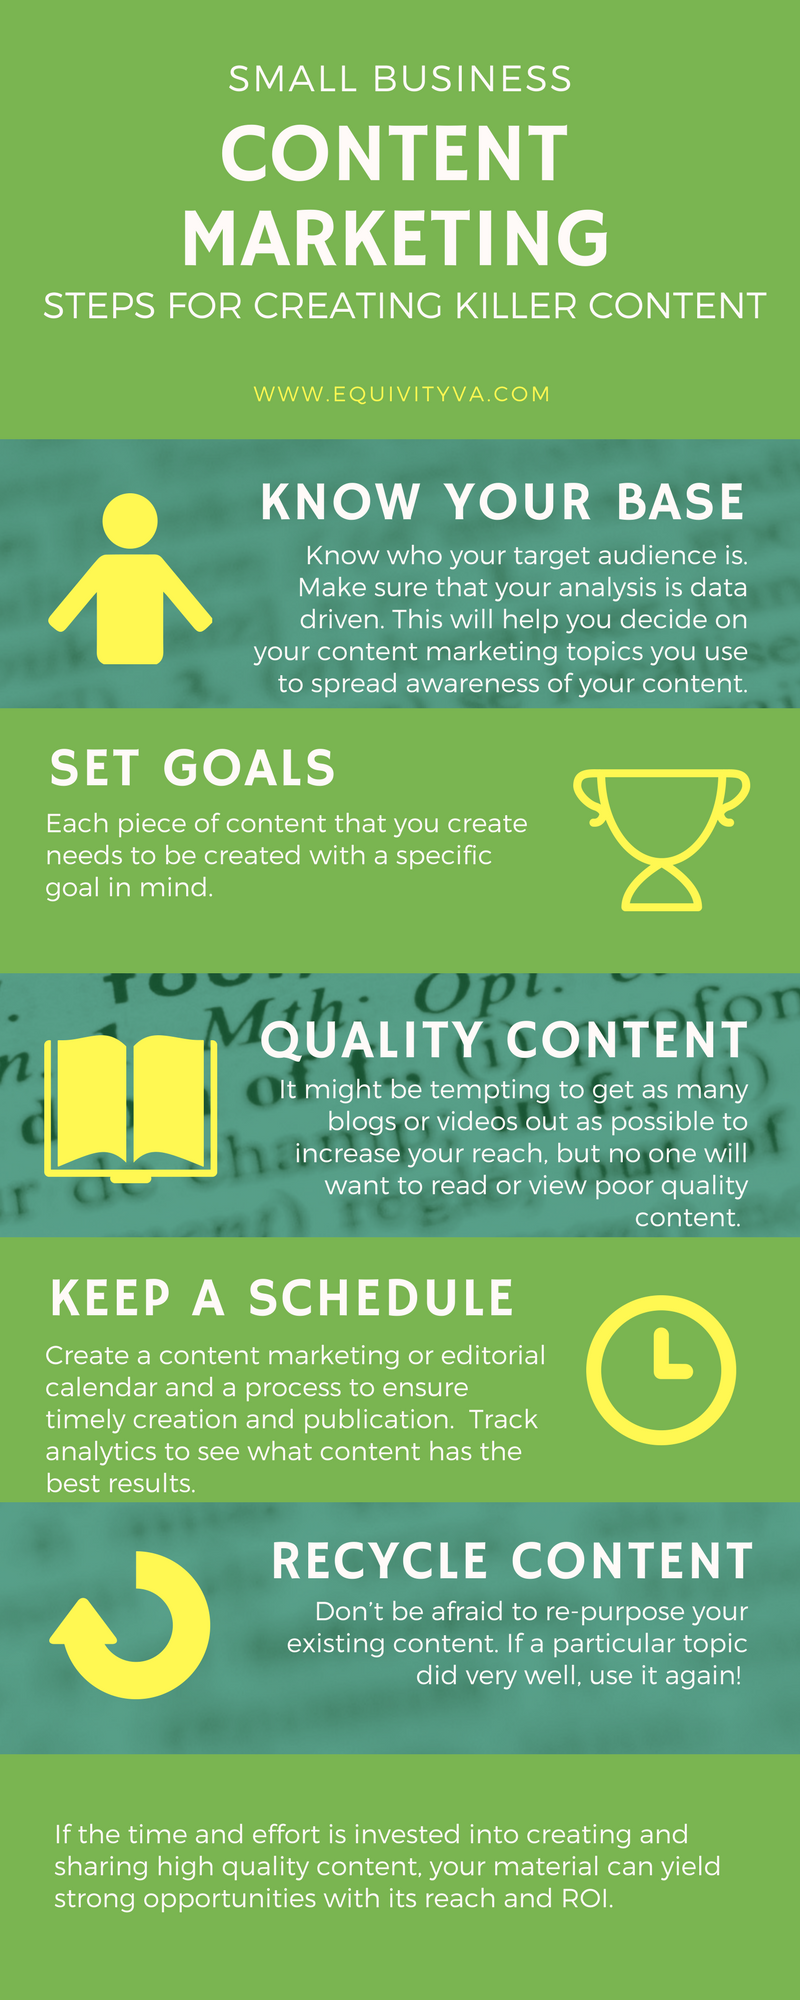 Content Marketing for Small Business [Infographic]